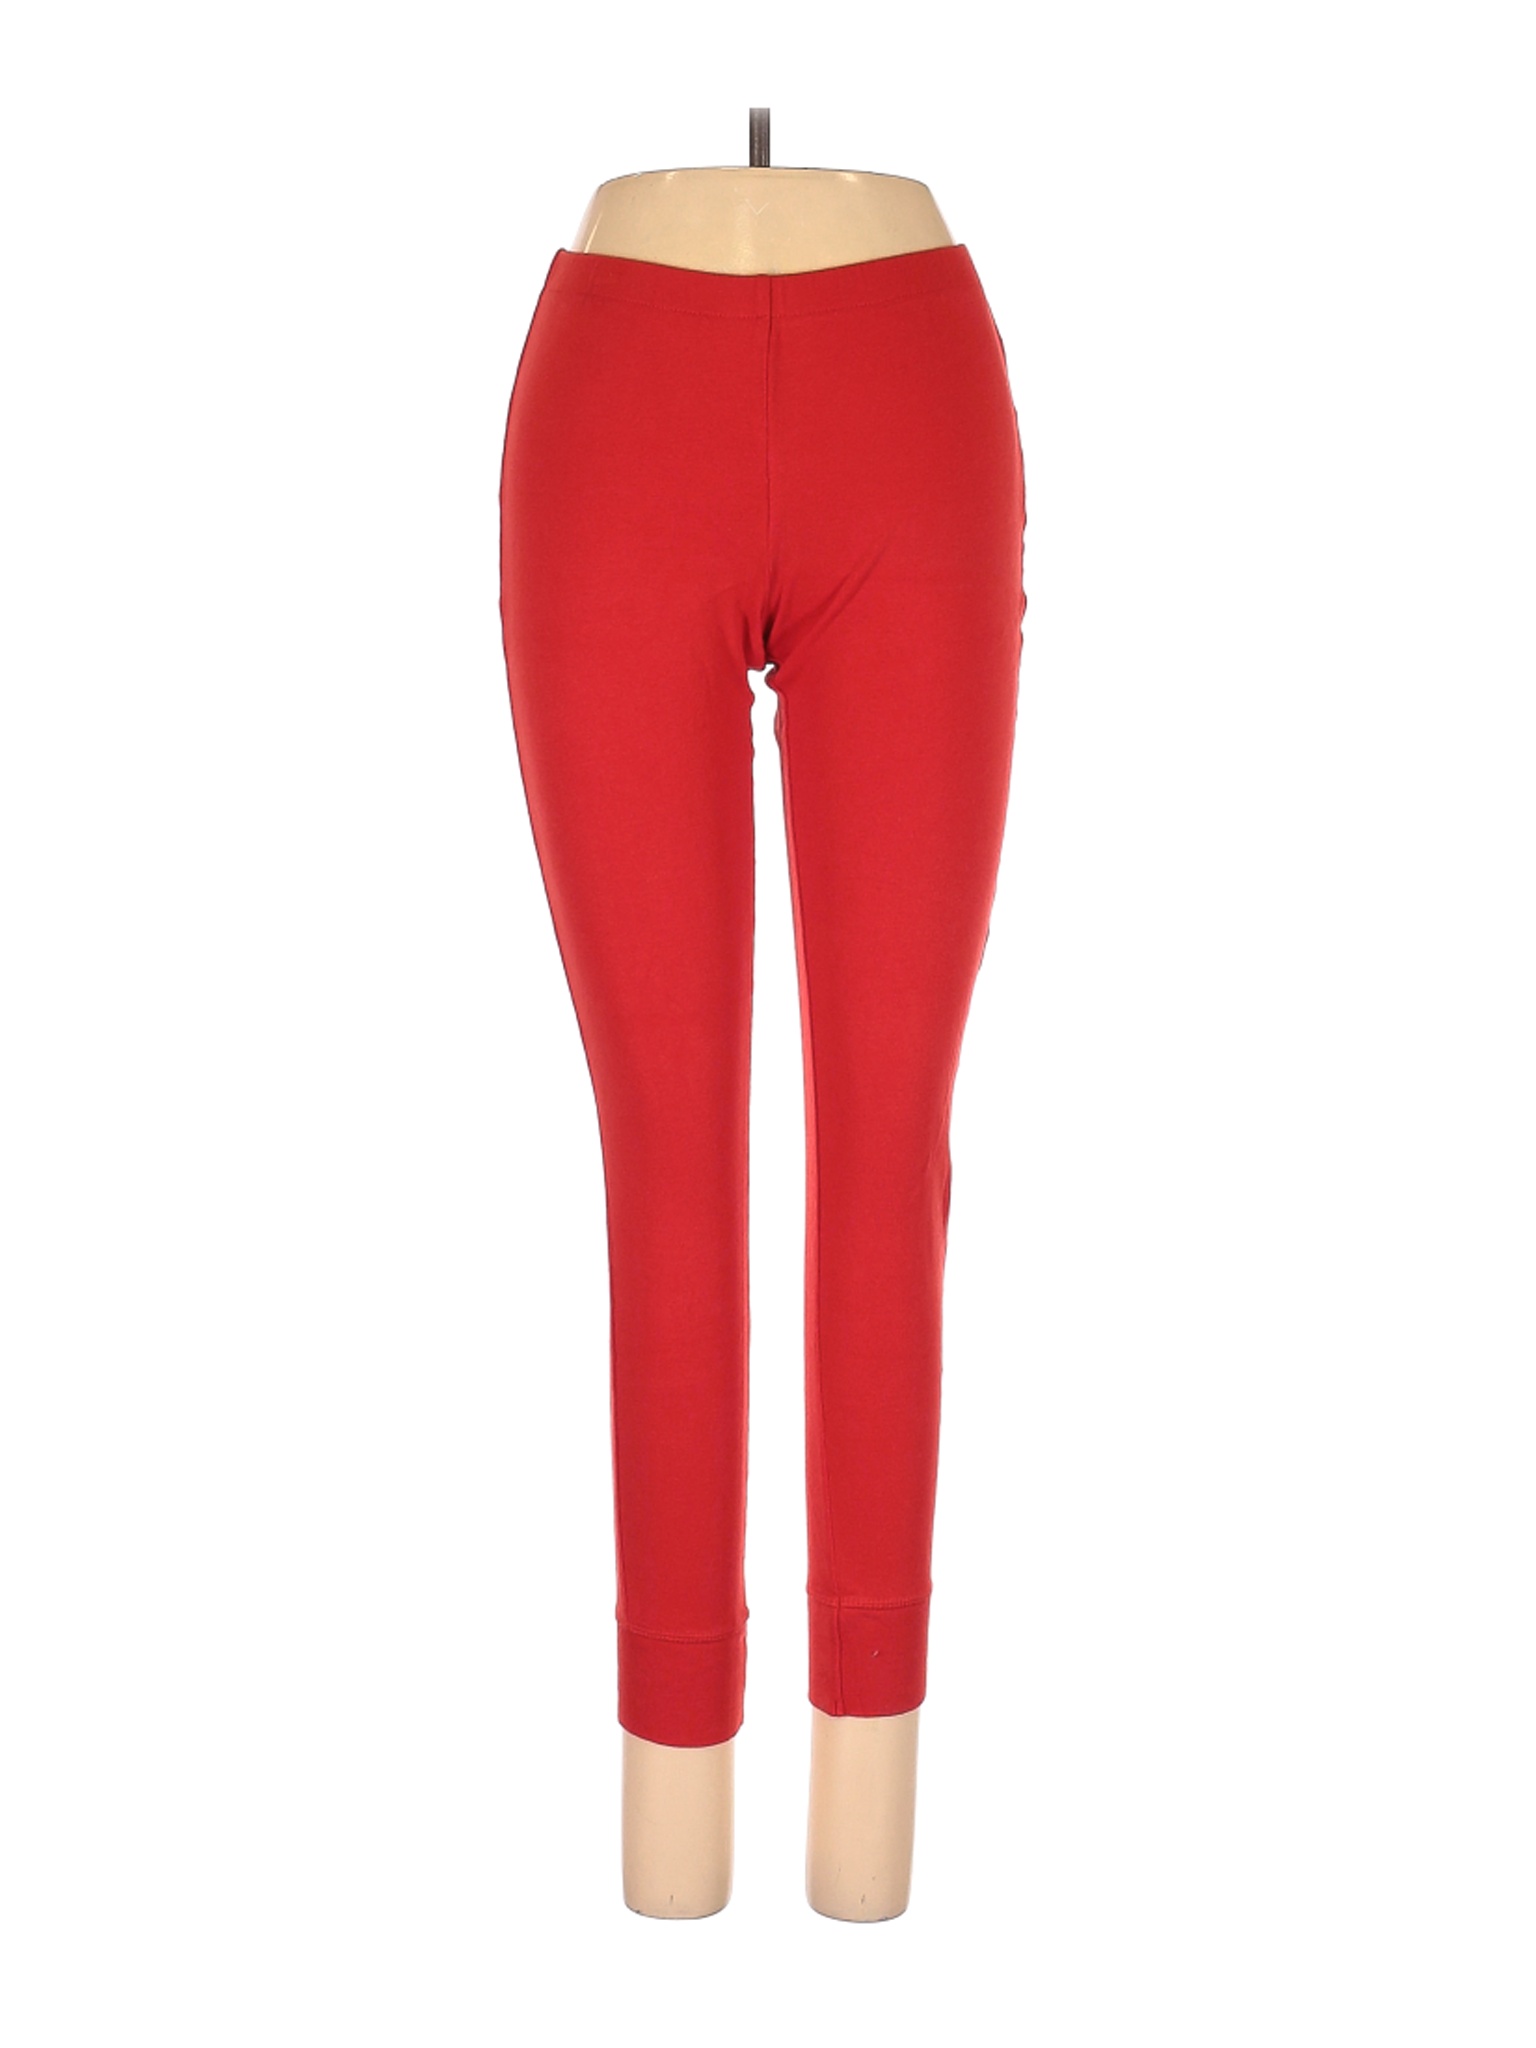 Unbranded Women Red Casual Pants S | eBay